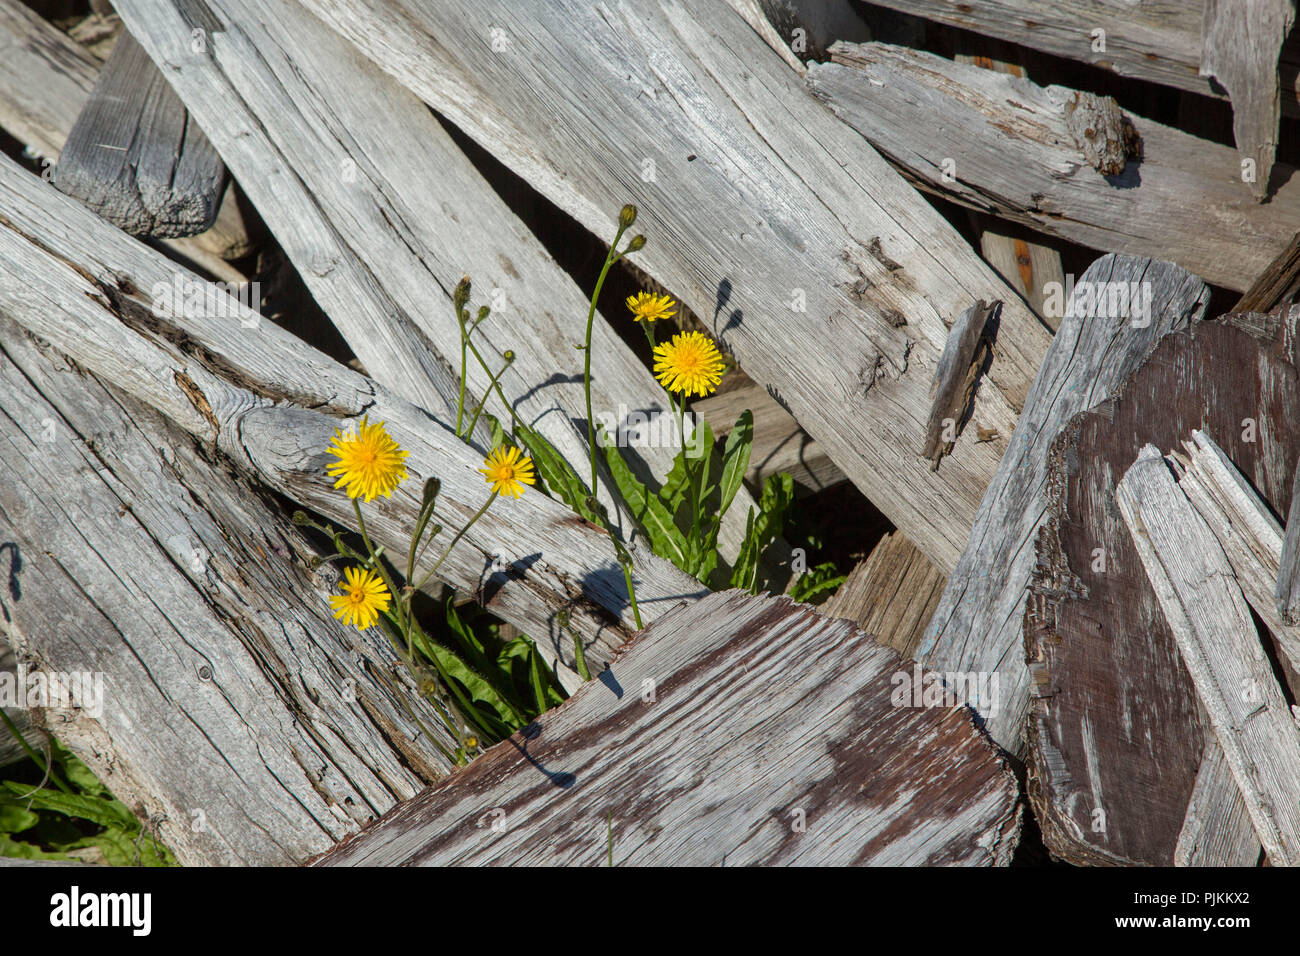 Iceland, Blossoming arnica in driftwood, Arnica montana Stock Photo